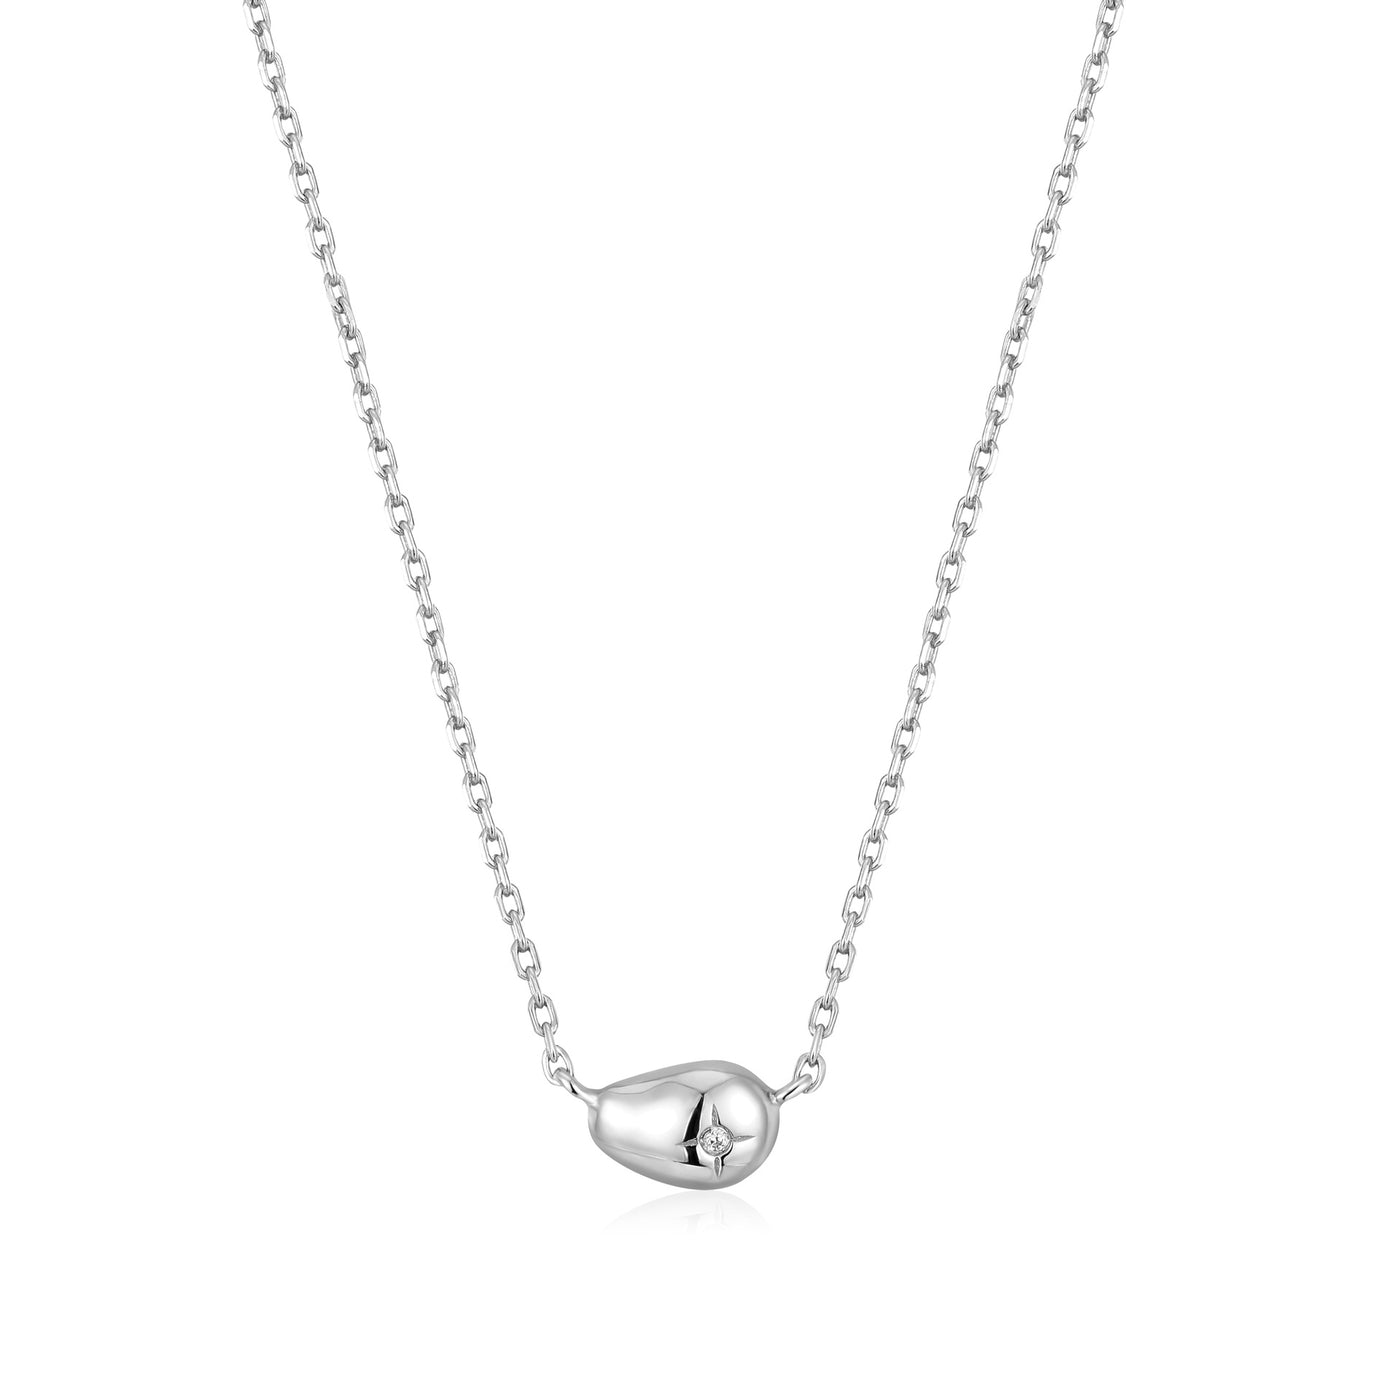 Pearl Power - Silver Pebble Sparkle Necklace